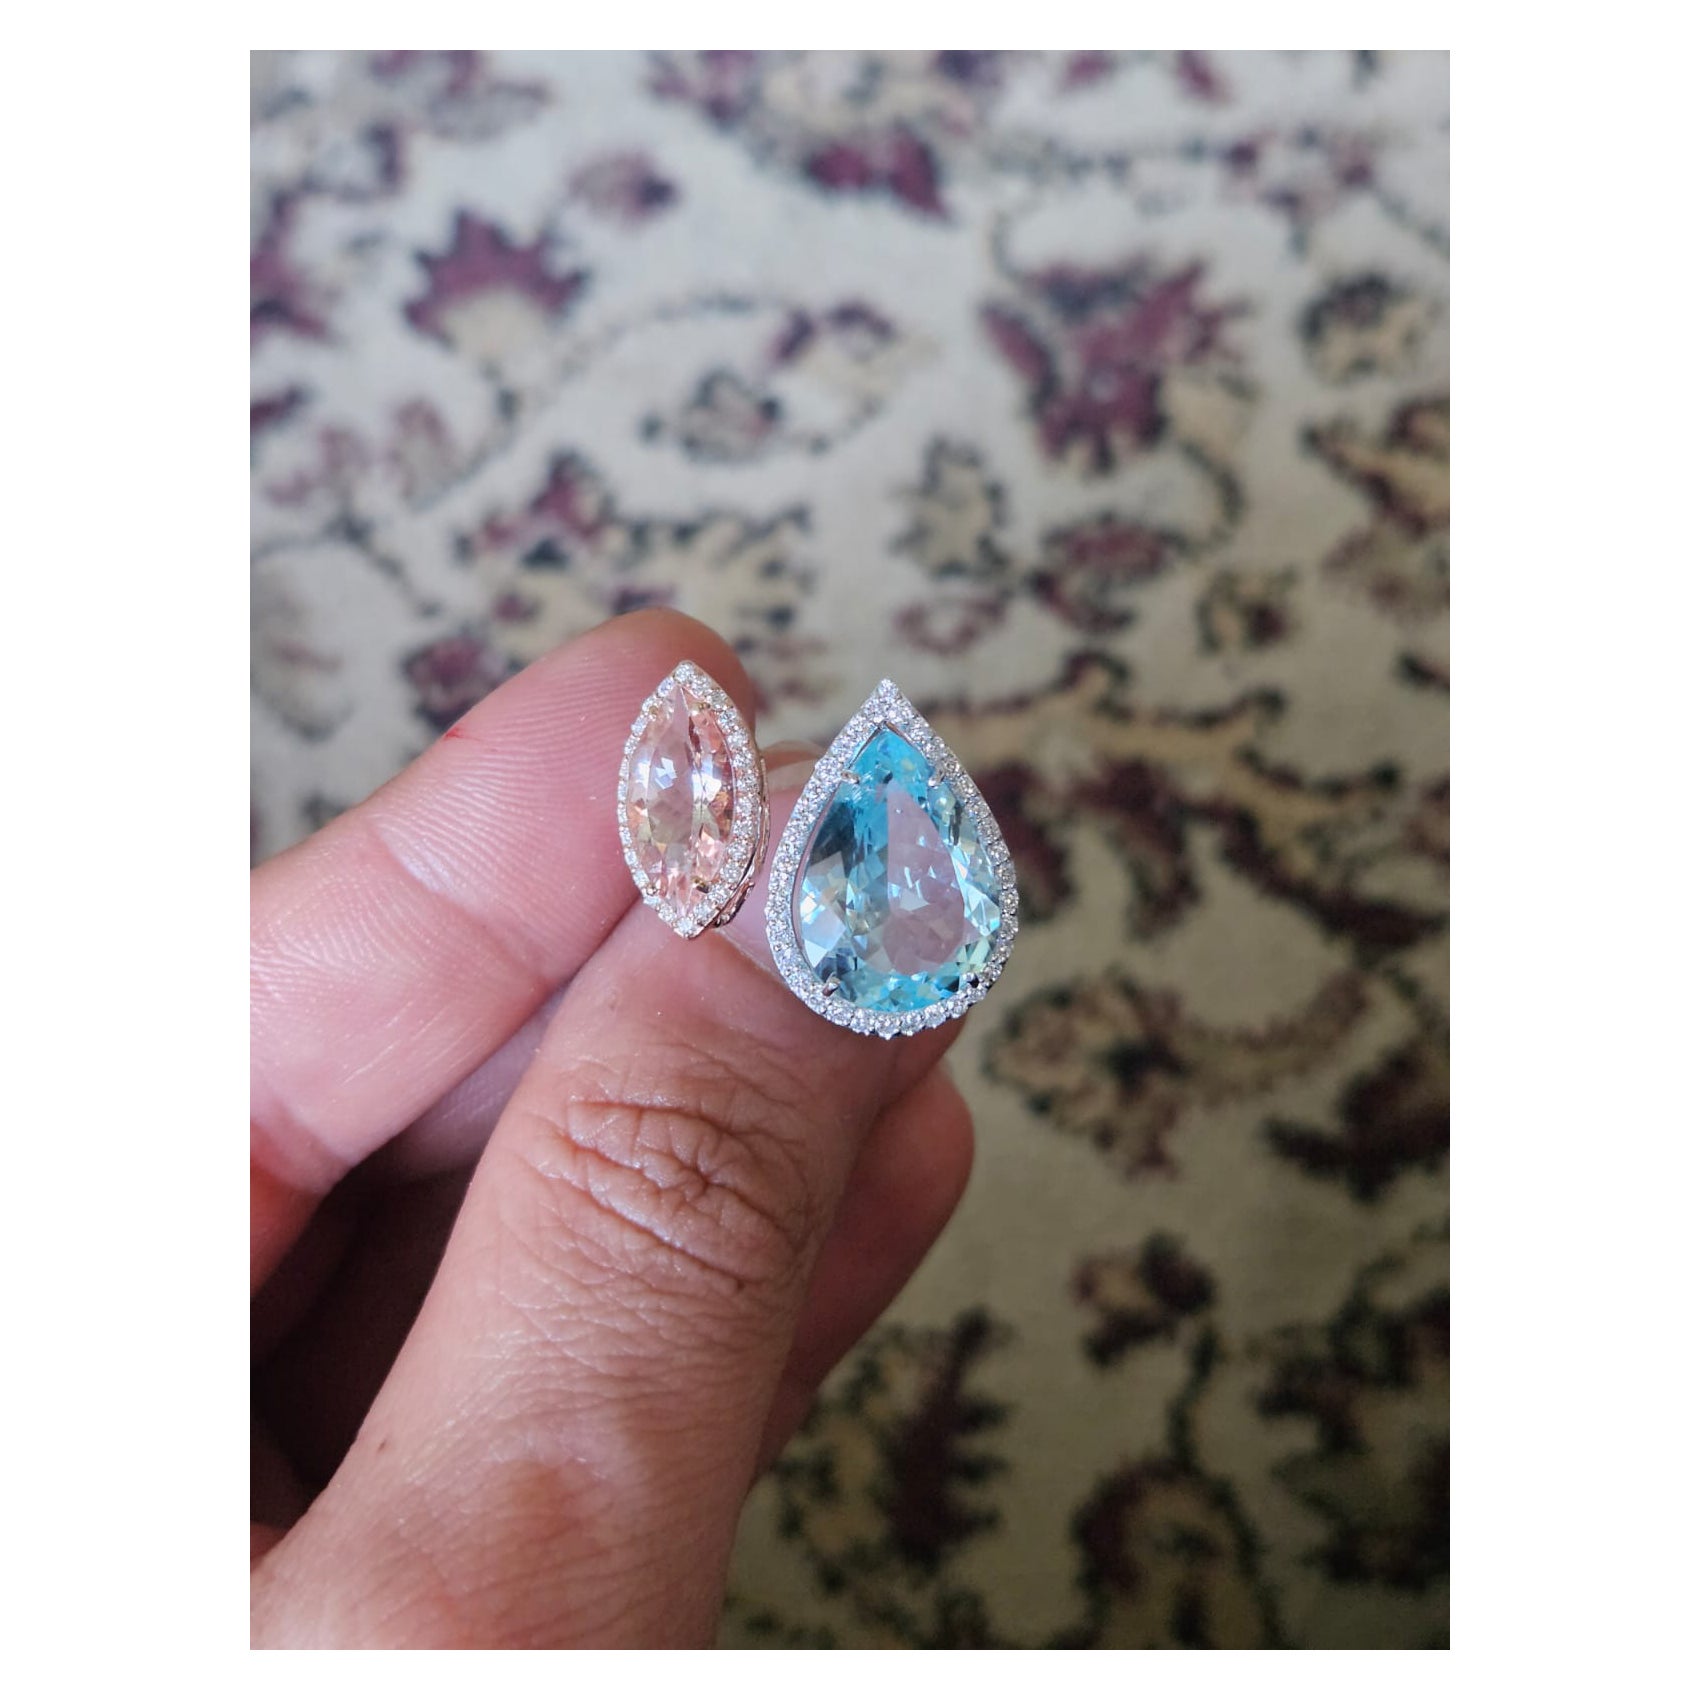 A very gorgeous and beautiful, modern style, Aquamarine & Morganite Cocktail/ Engagement Ring set in 18K Rose/ White Gold. The weight of the pear shaped Aquamarine is 7.02 carats. The weight of the Marquise shaped Morganite 7.02 carats. The Diamonds